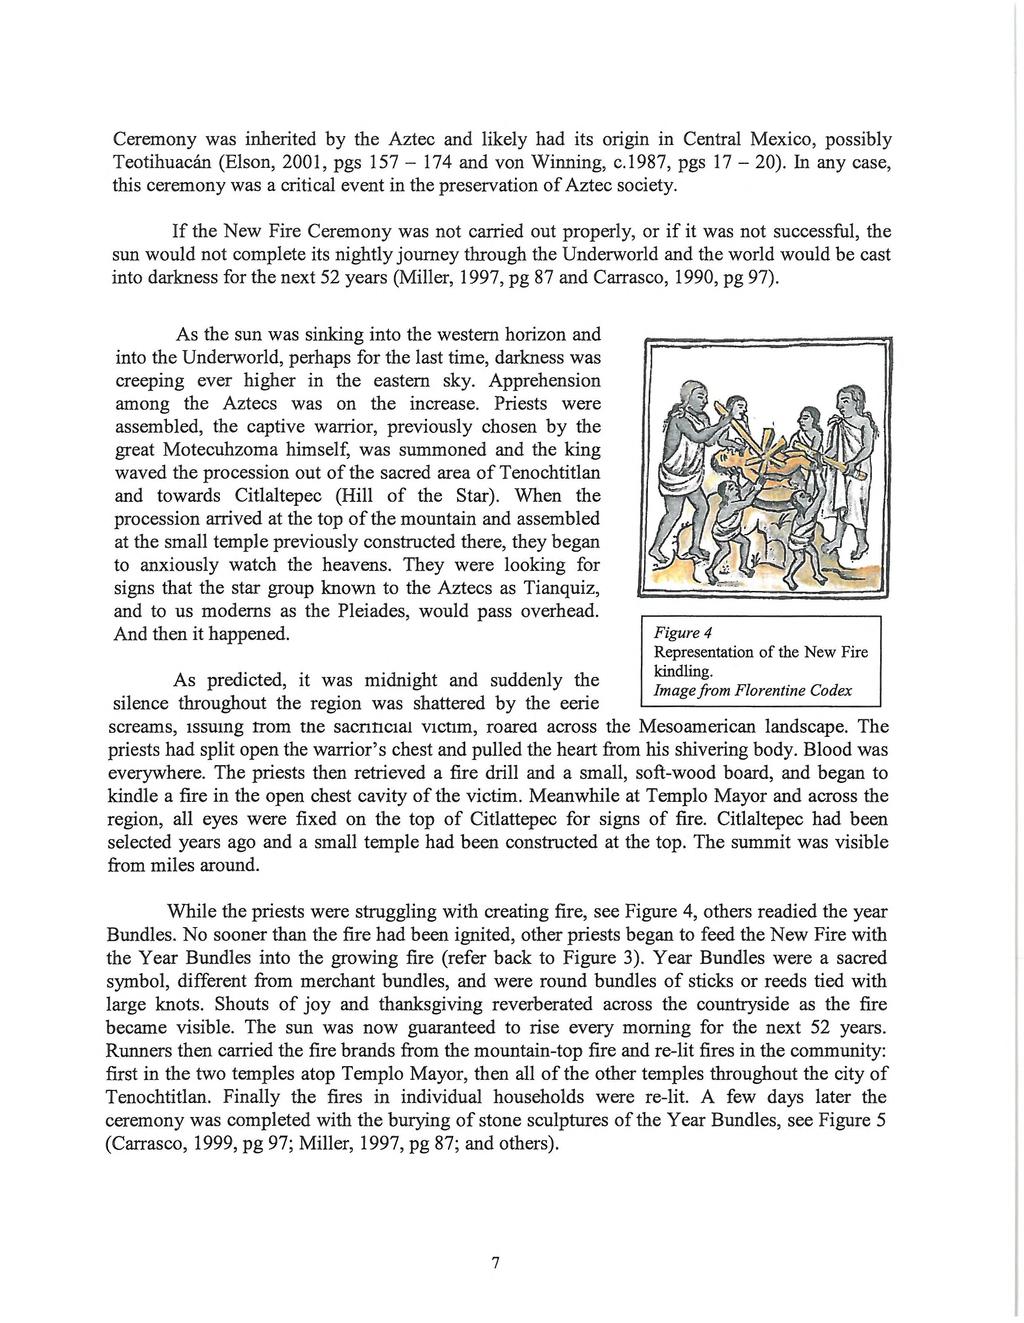 Ceremony was inherited by the Aztec and likely had its origin in Central Mexico, possibly Teotihuacán (Elson, 2001, pgs 157-174 and von Winning, c.1987, pgs 17-20).